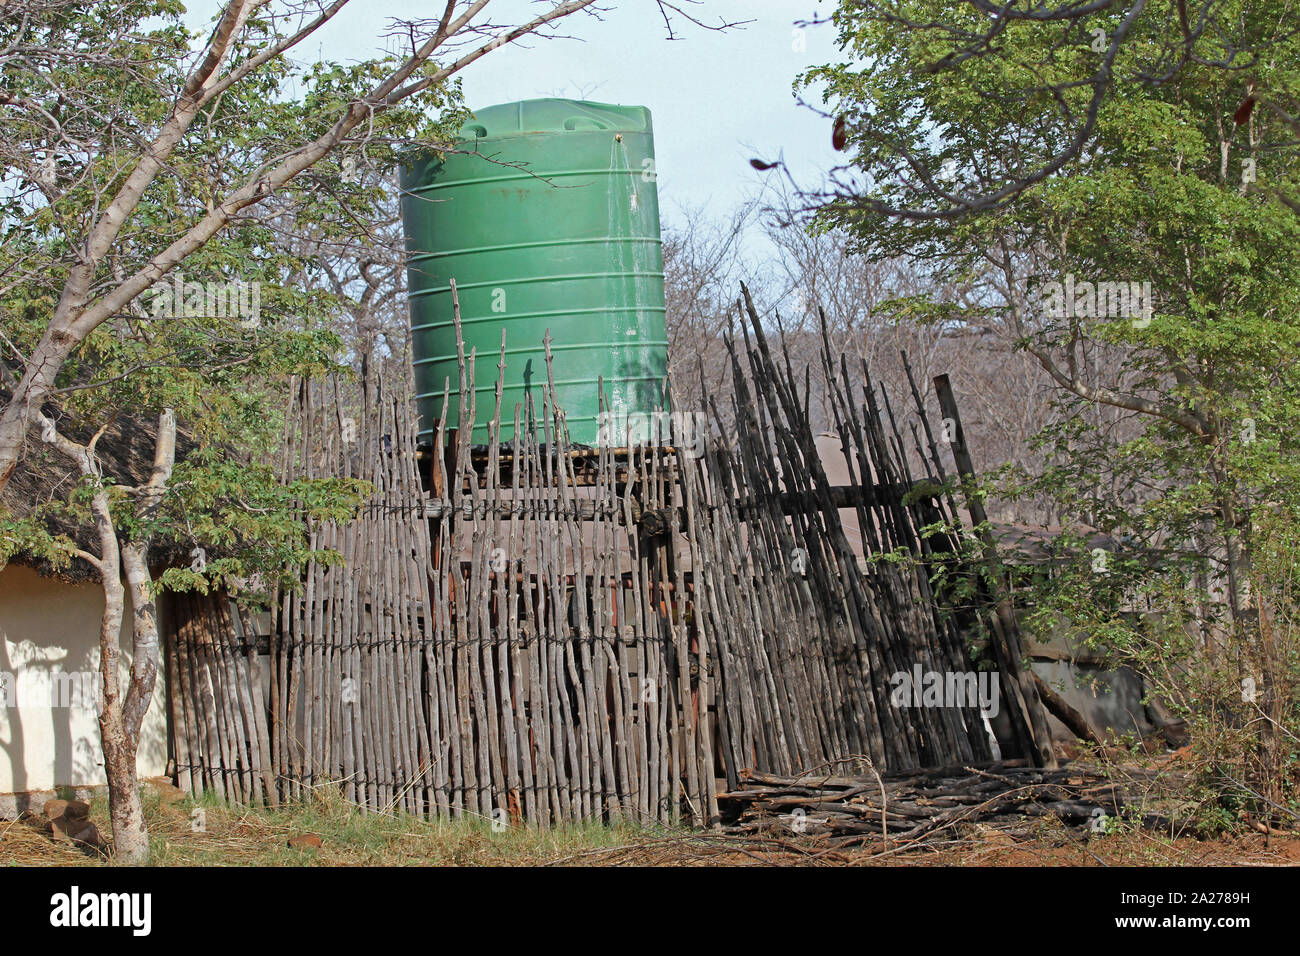 Water tank surrounded by a wooden fence, Zimbabwe. Stock Photo